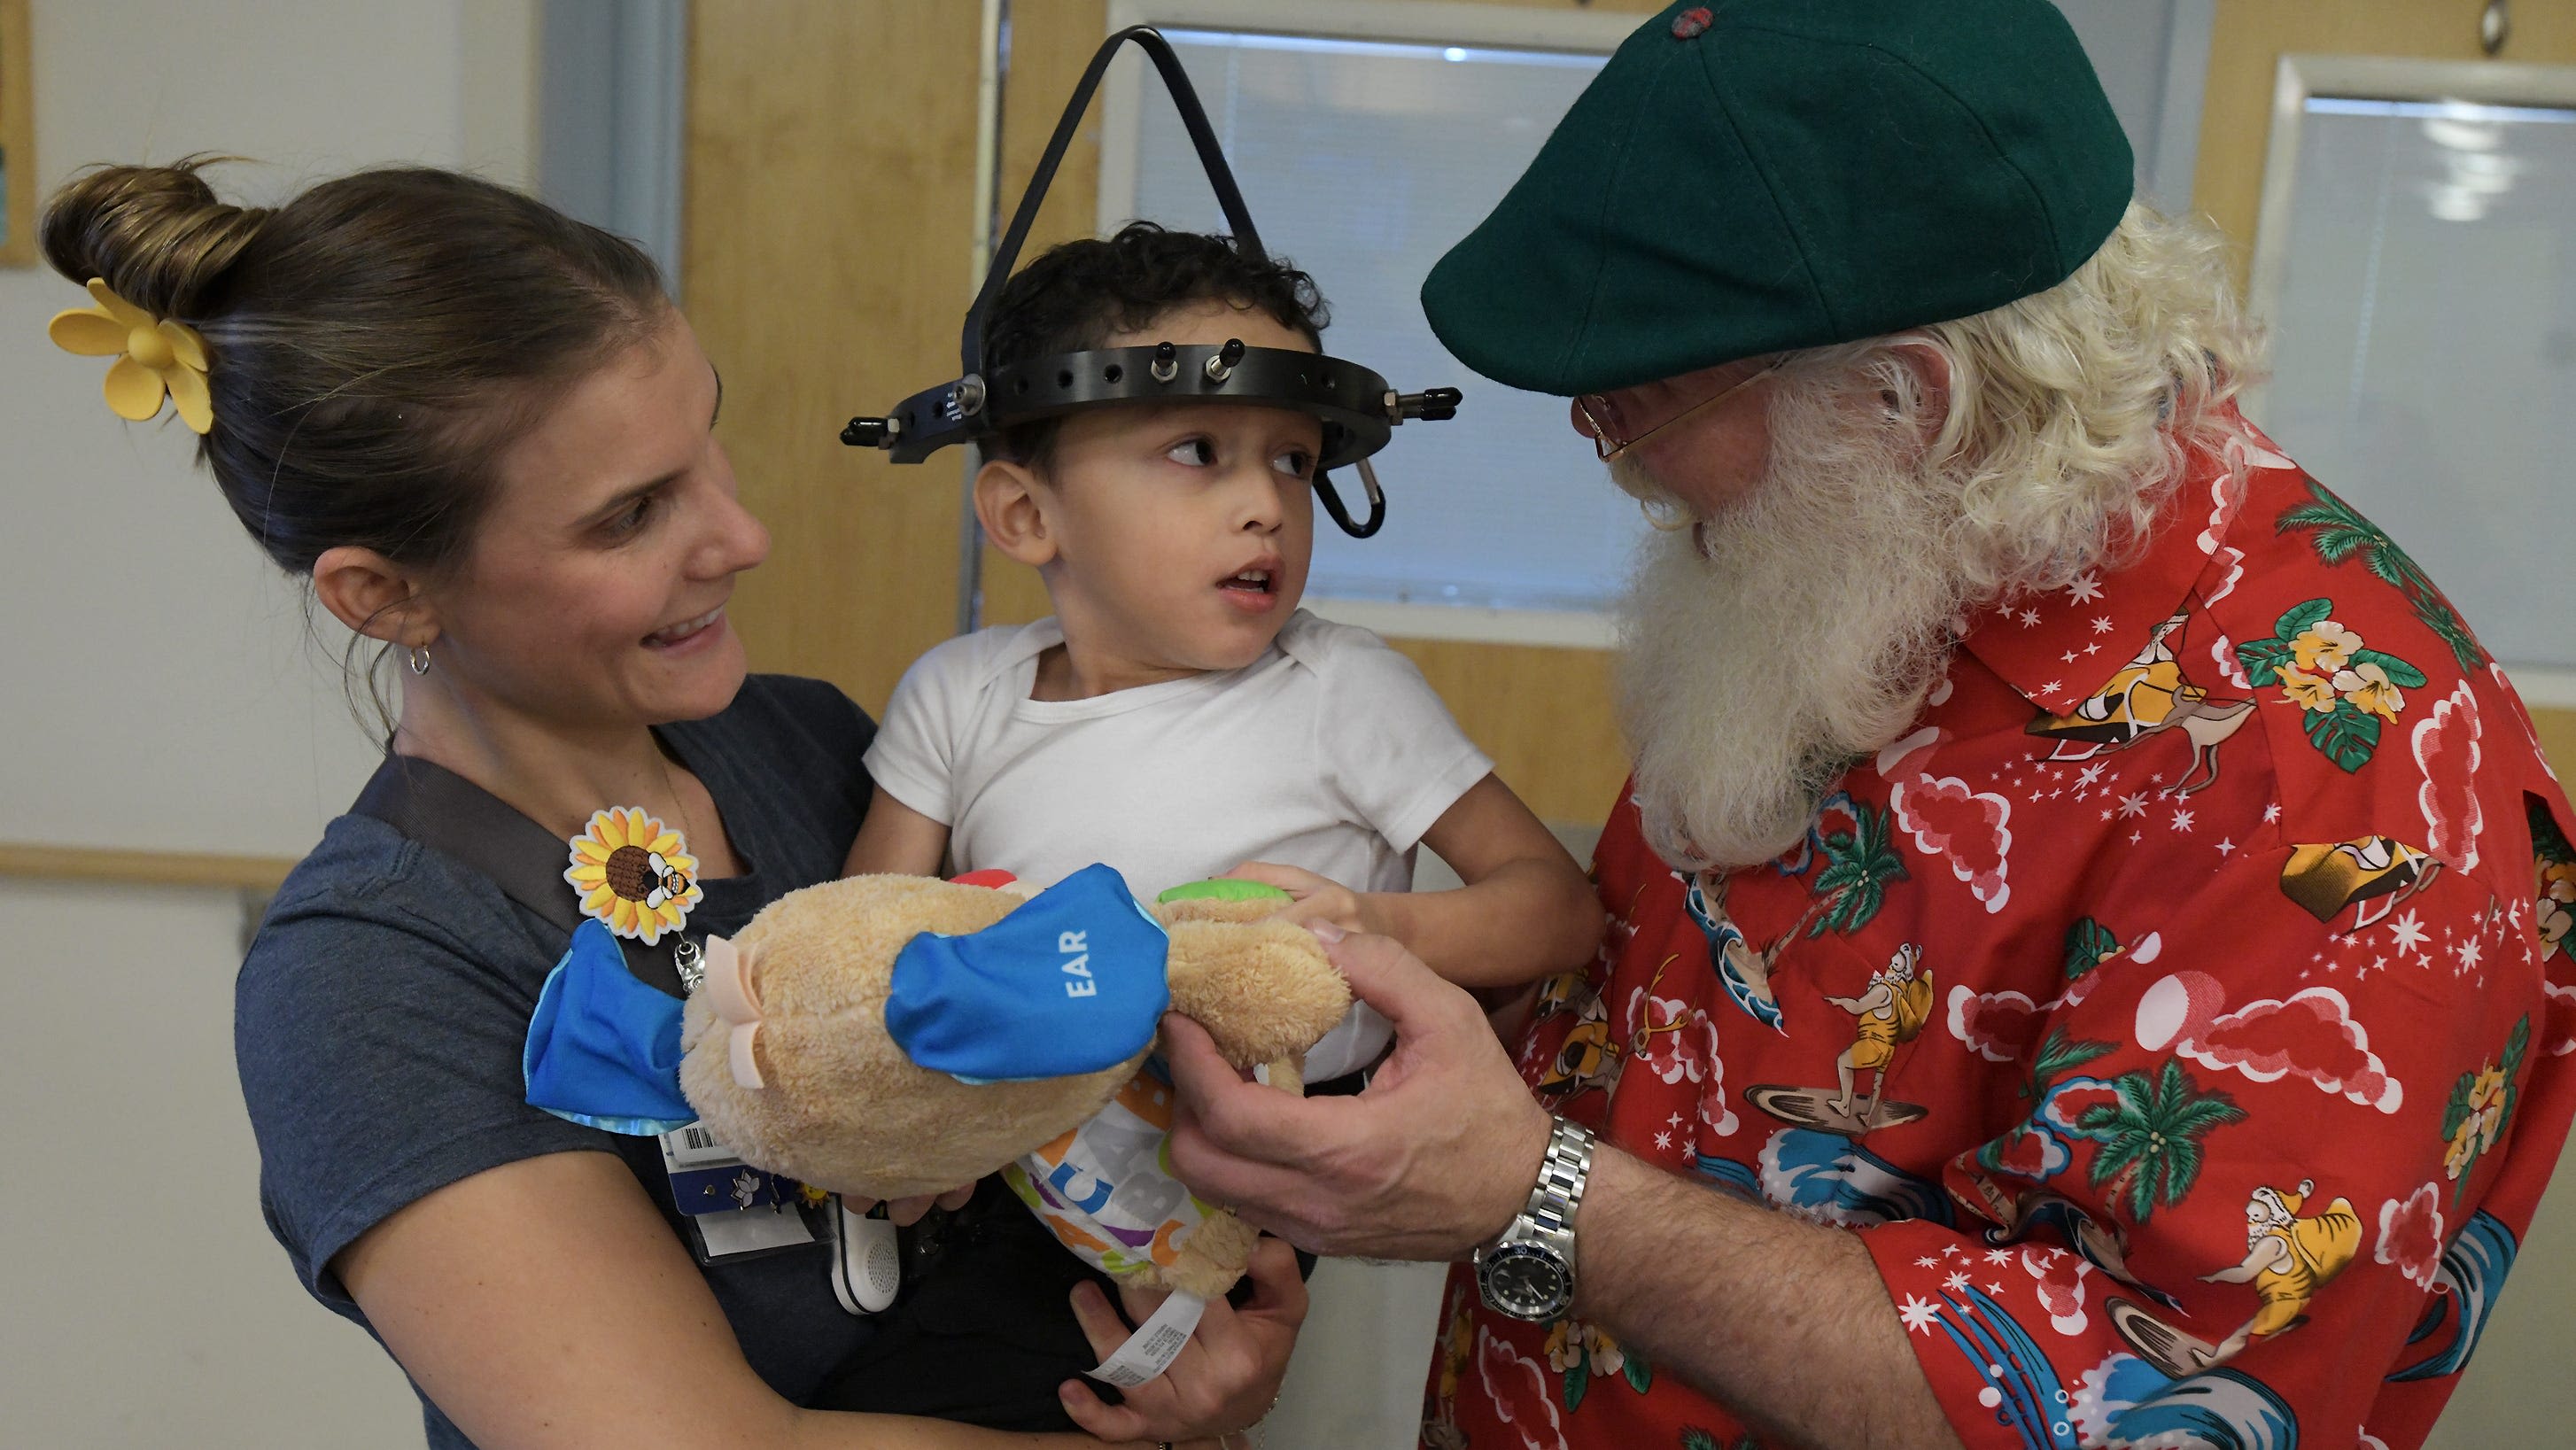 It is Christmas in July for young patients at Wolfson Children's Hospital